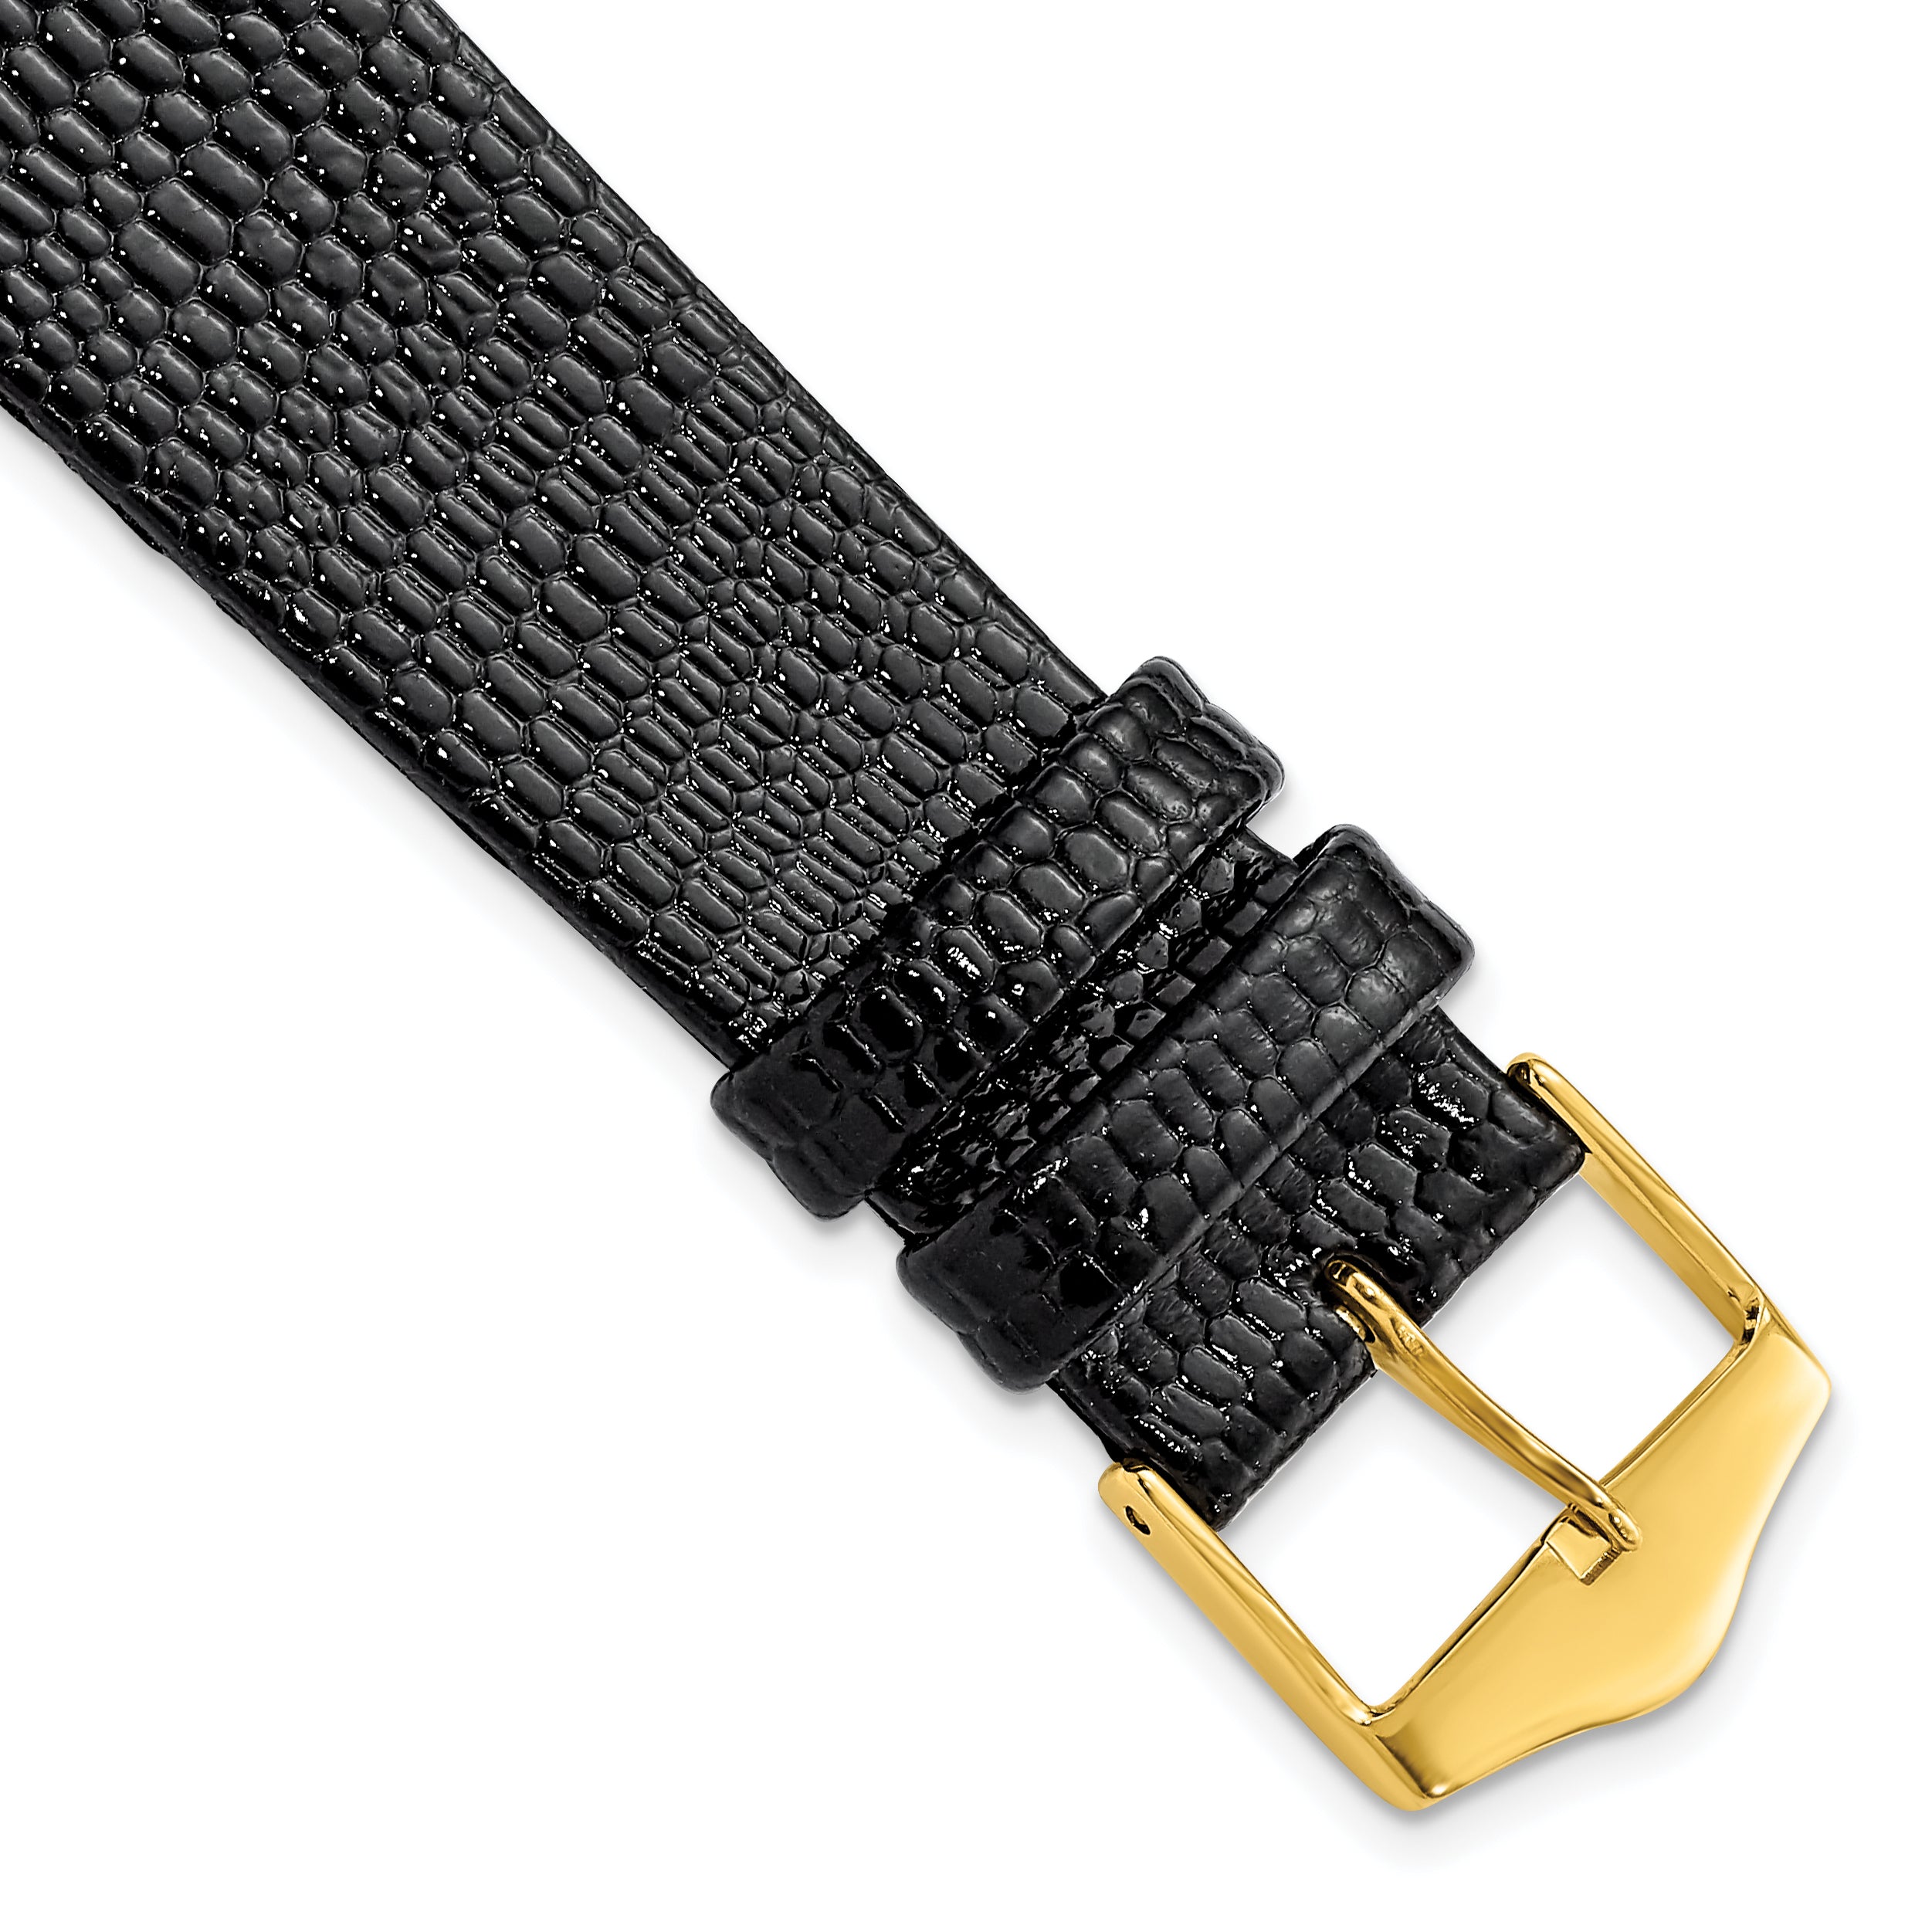 DeBeer 19mm Flat Black Lizard Grain Leather with Gold-tone Buckle 7.5 inch Watch Band